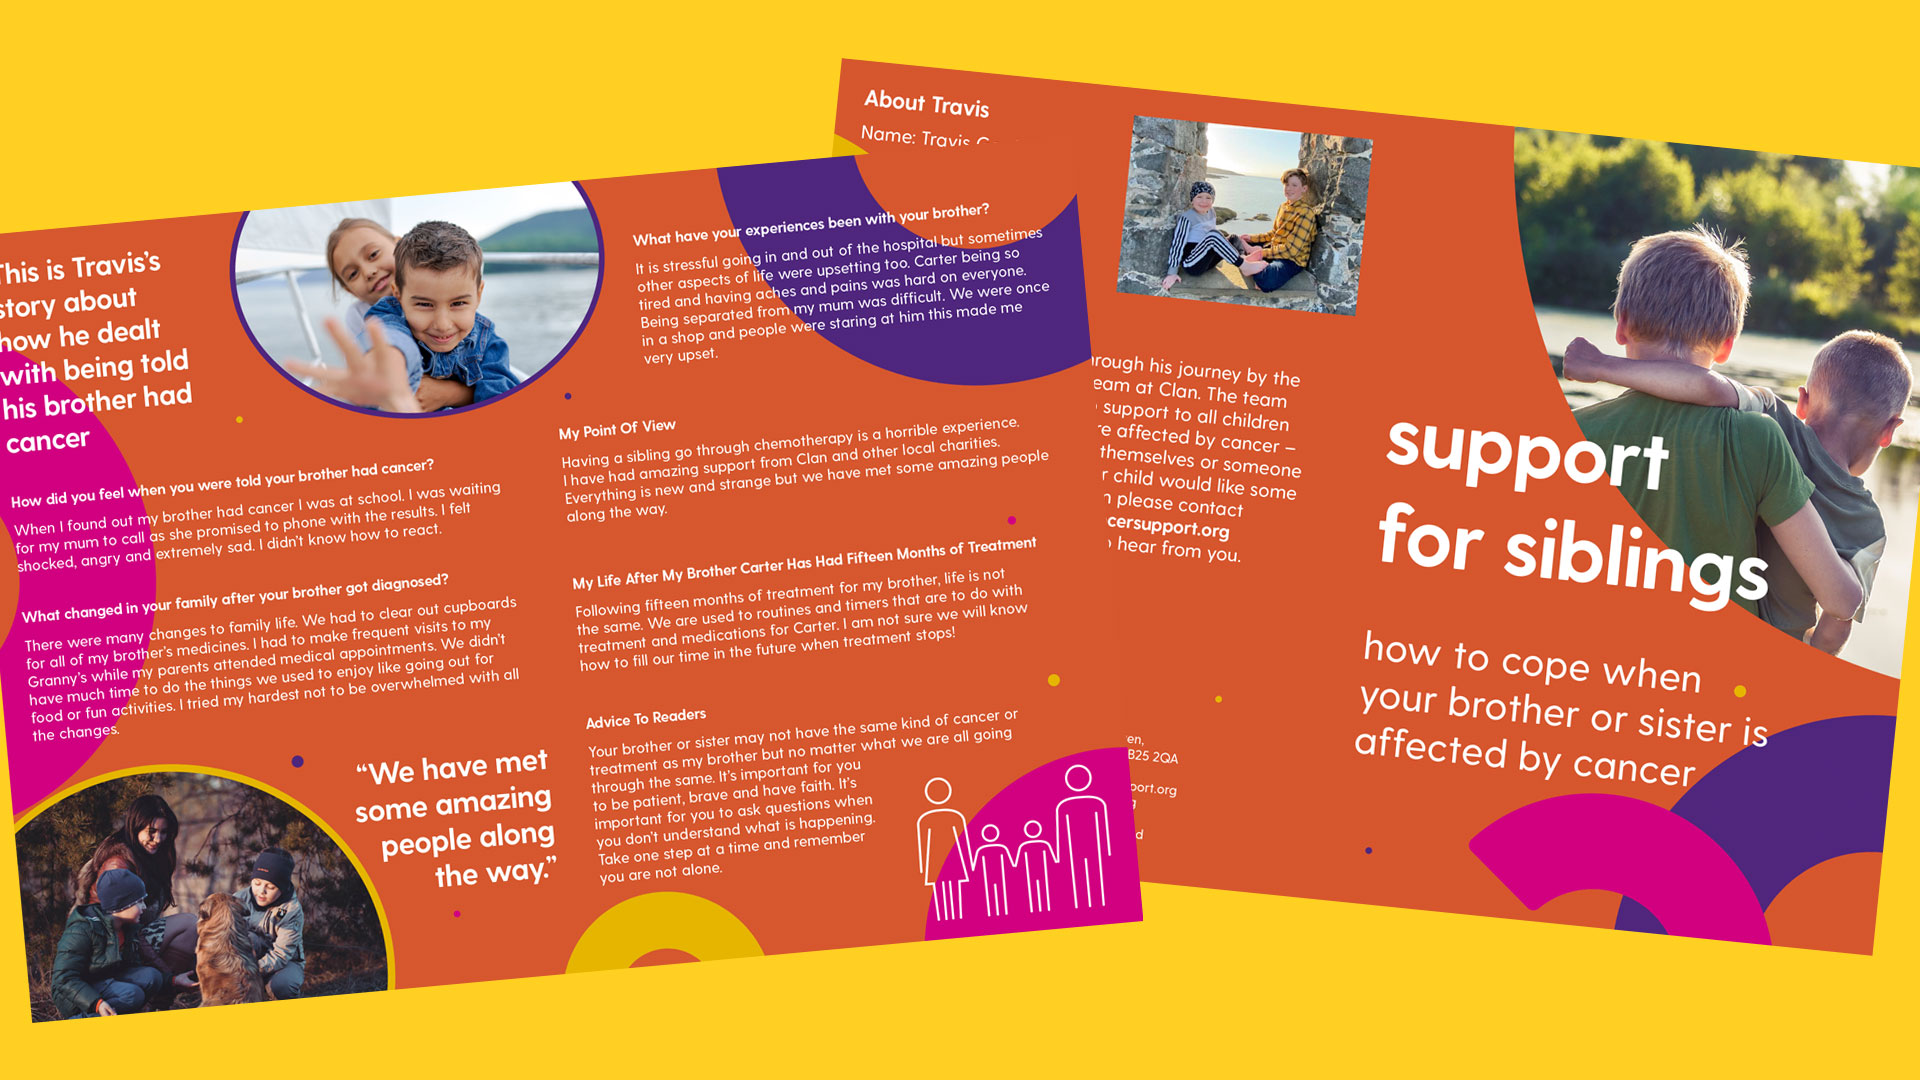 The support for siblings brochure as described in the article